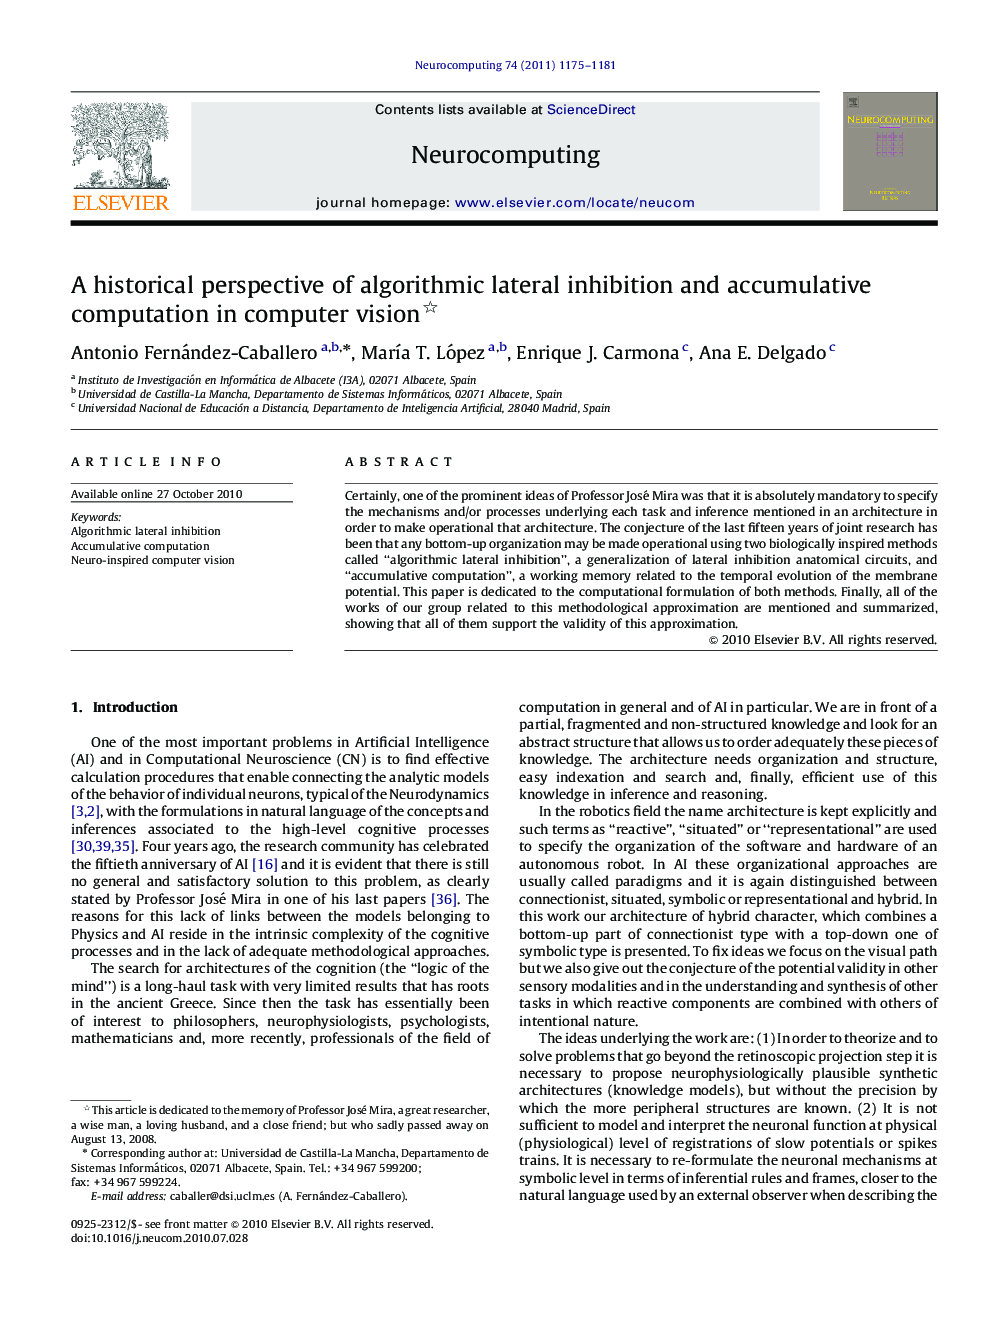 A historical perspective of algorithmic lateral inhibition and accumulative computation in computer vision 